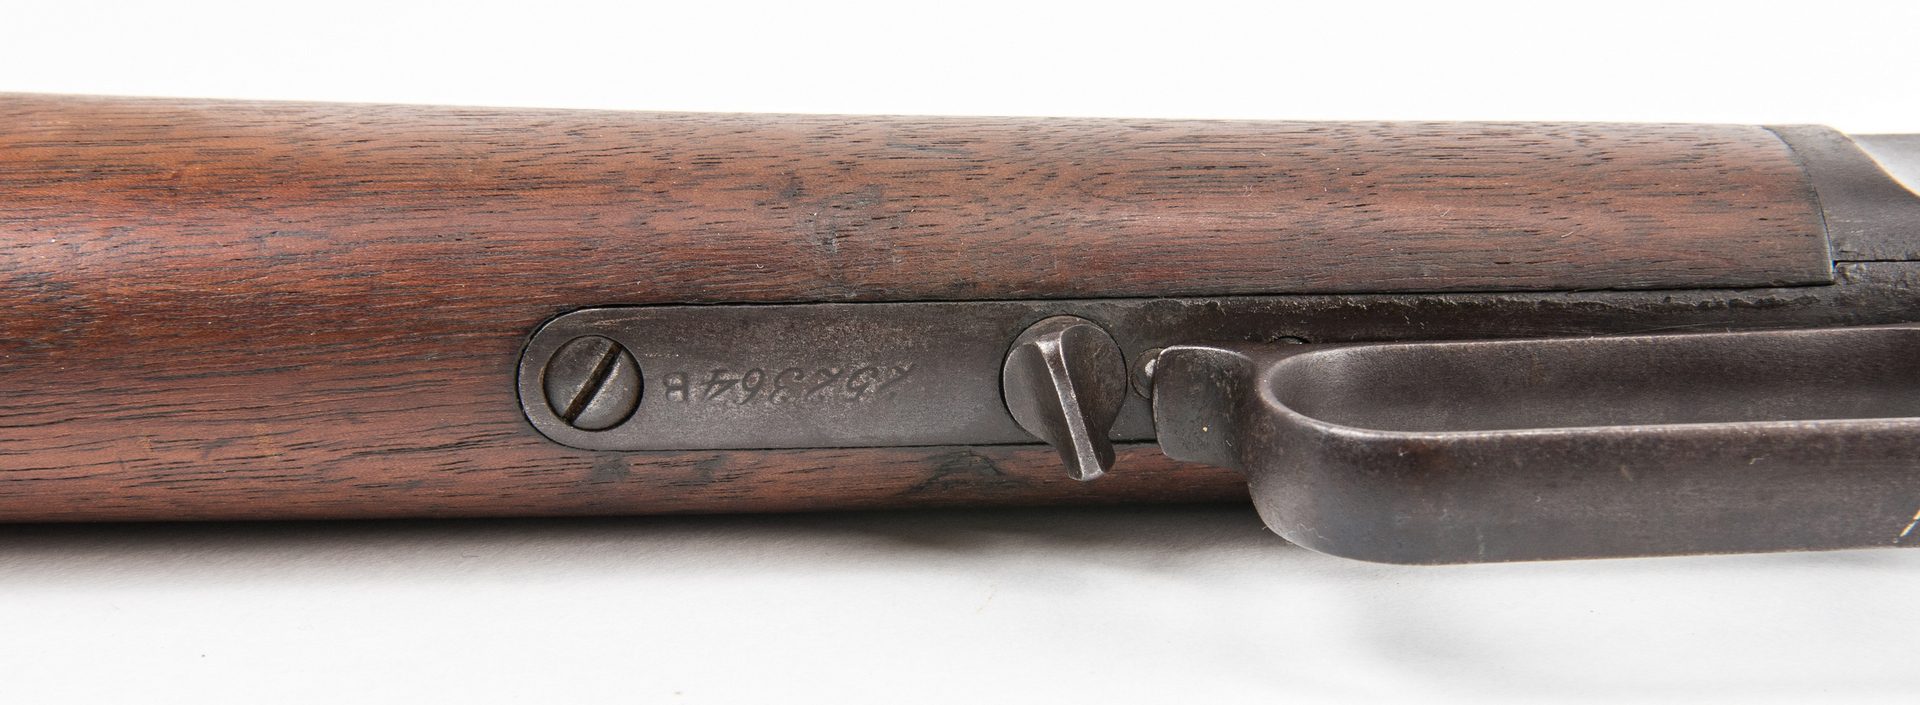 Lot 785: Winchester Model 1873, 32-20 Win Lever Action Rifle